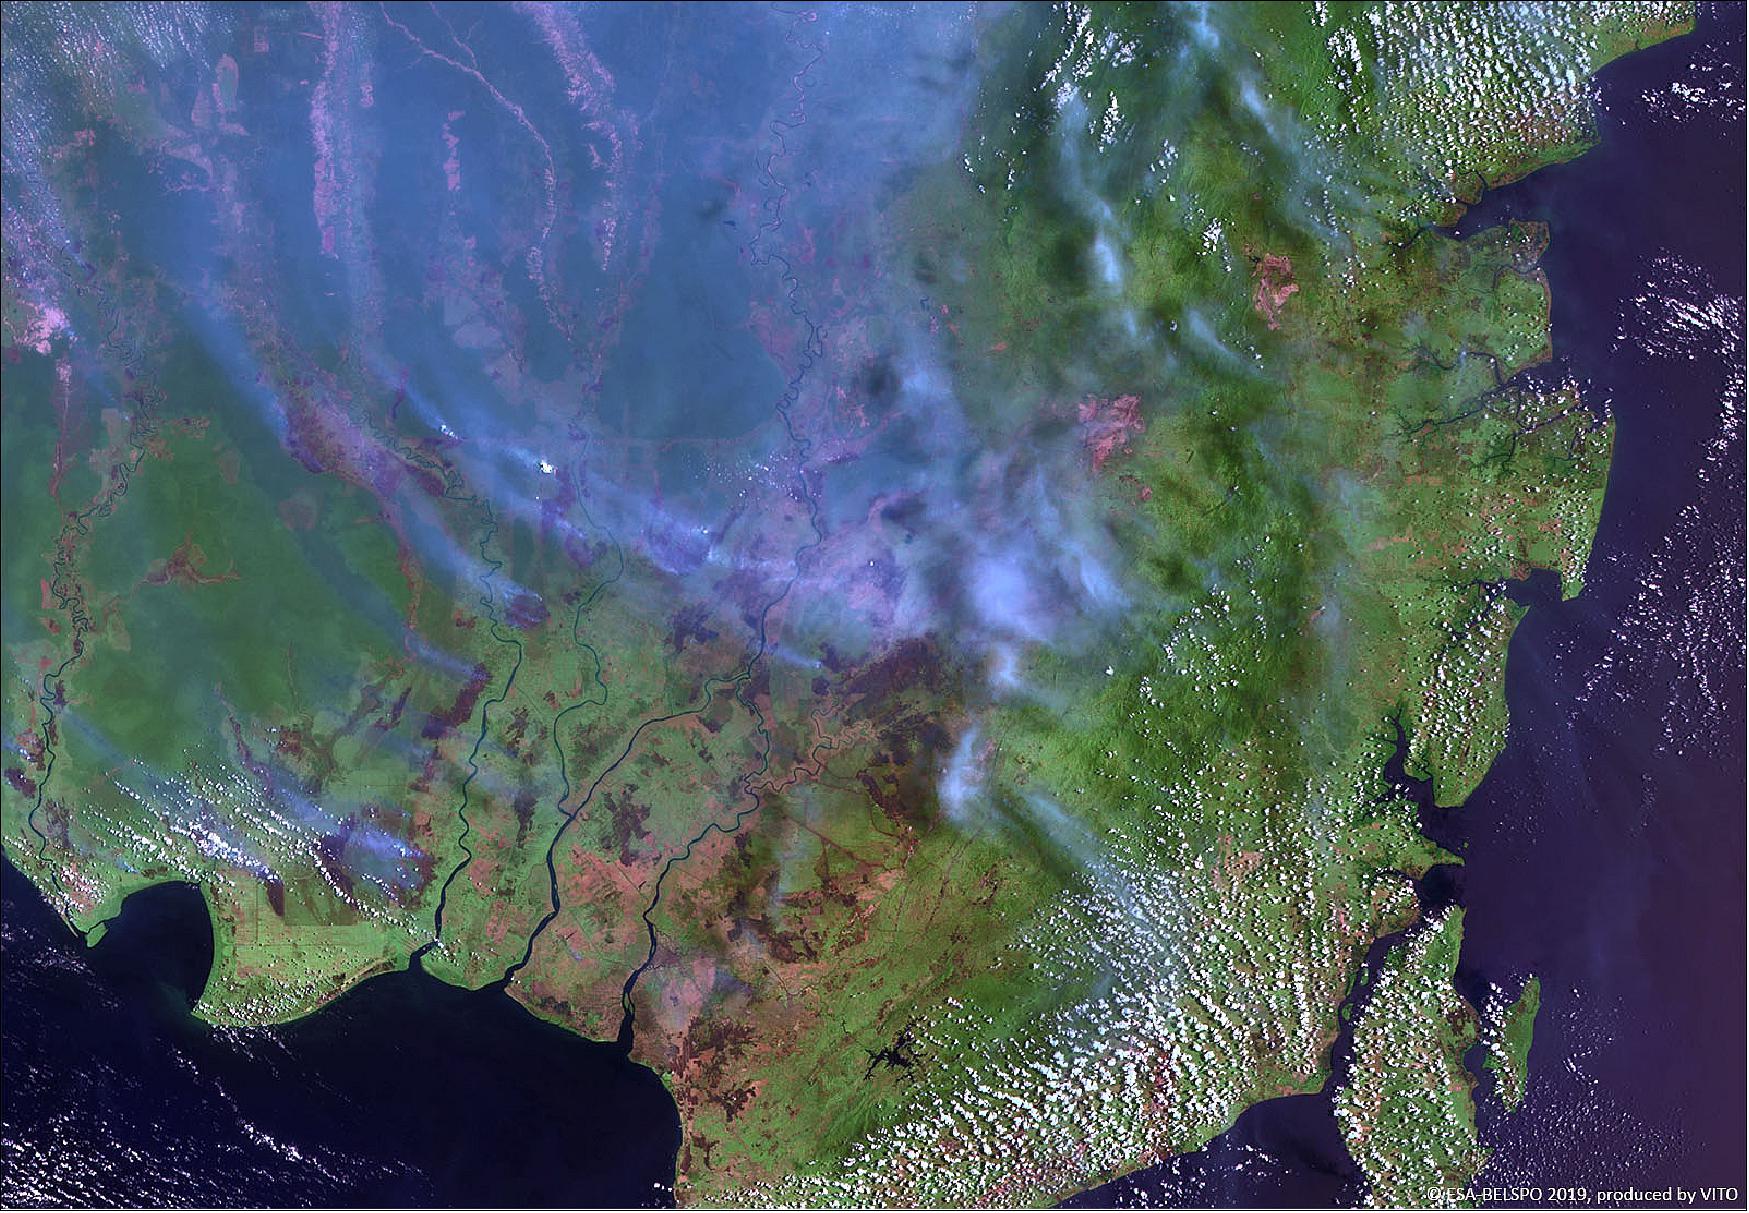 Figure 20: This false-color image from ESA's PROBA-V minisatellite, captured on 18 September, shows an abundance of smoke plumes over Kalimantan, the Indonesian part of the island of Borneo (image credit: ESA/Belspo – produced by VITO)